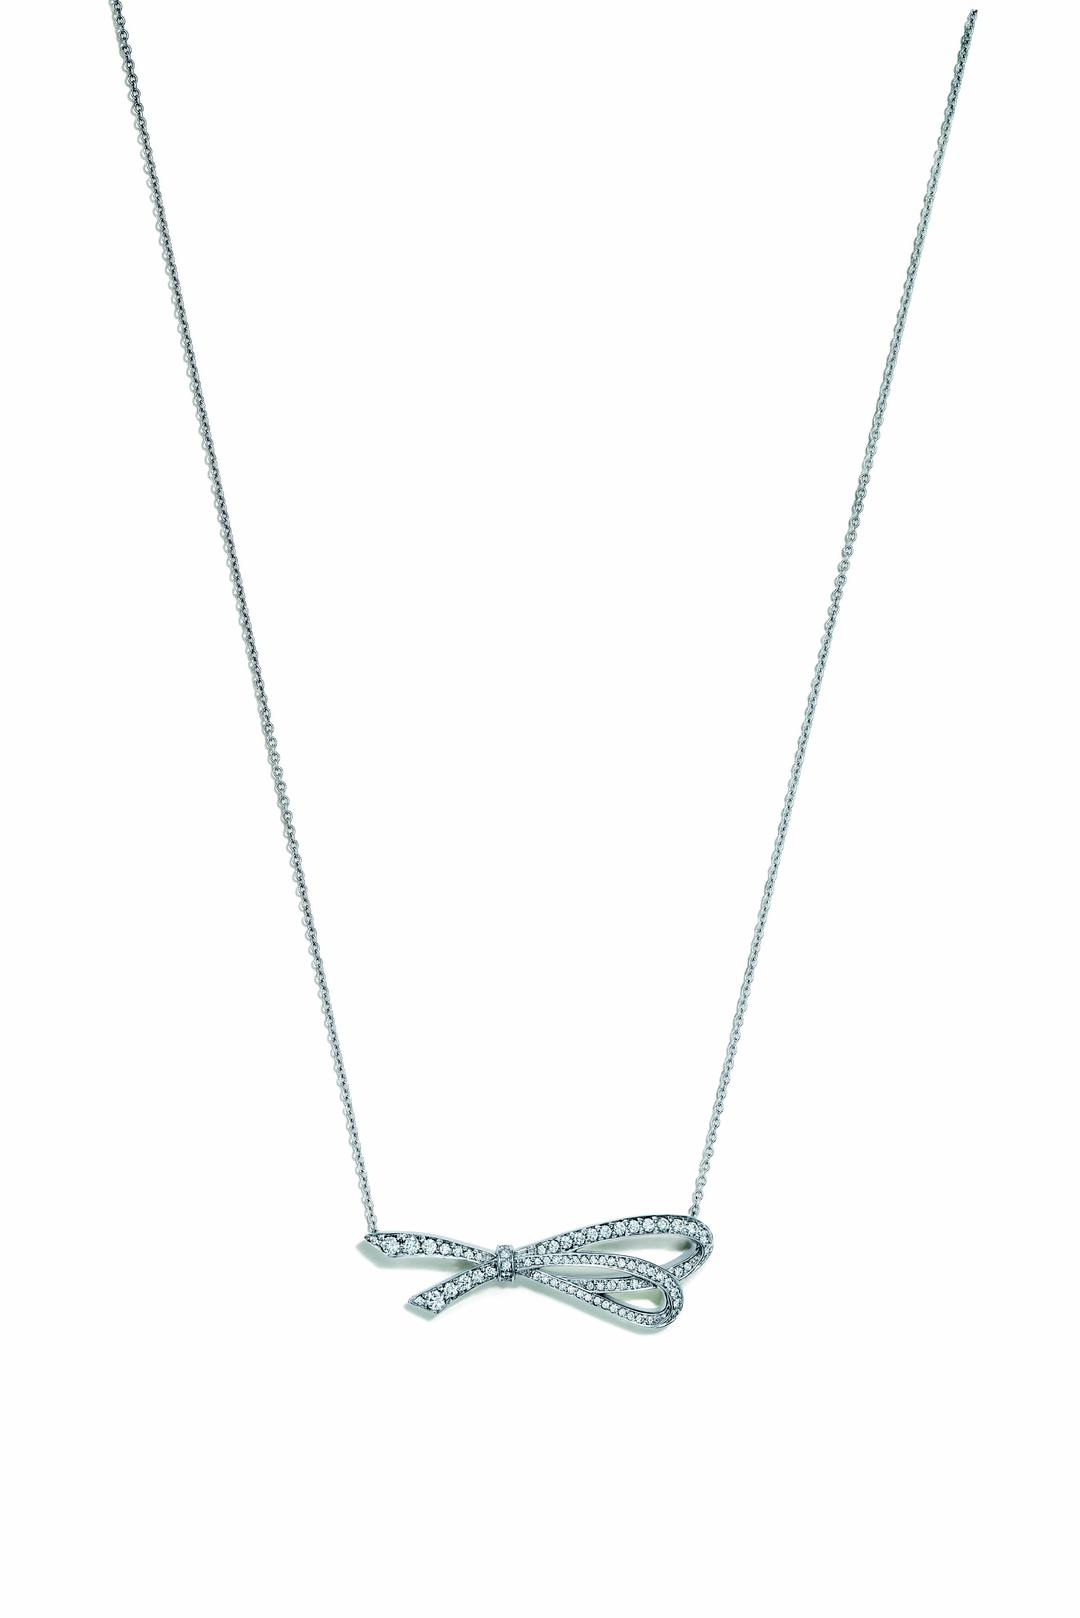 Bow necklace in rose gold with white diamonds | Tiffany & Co. | The